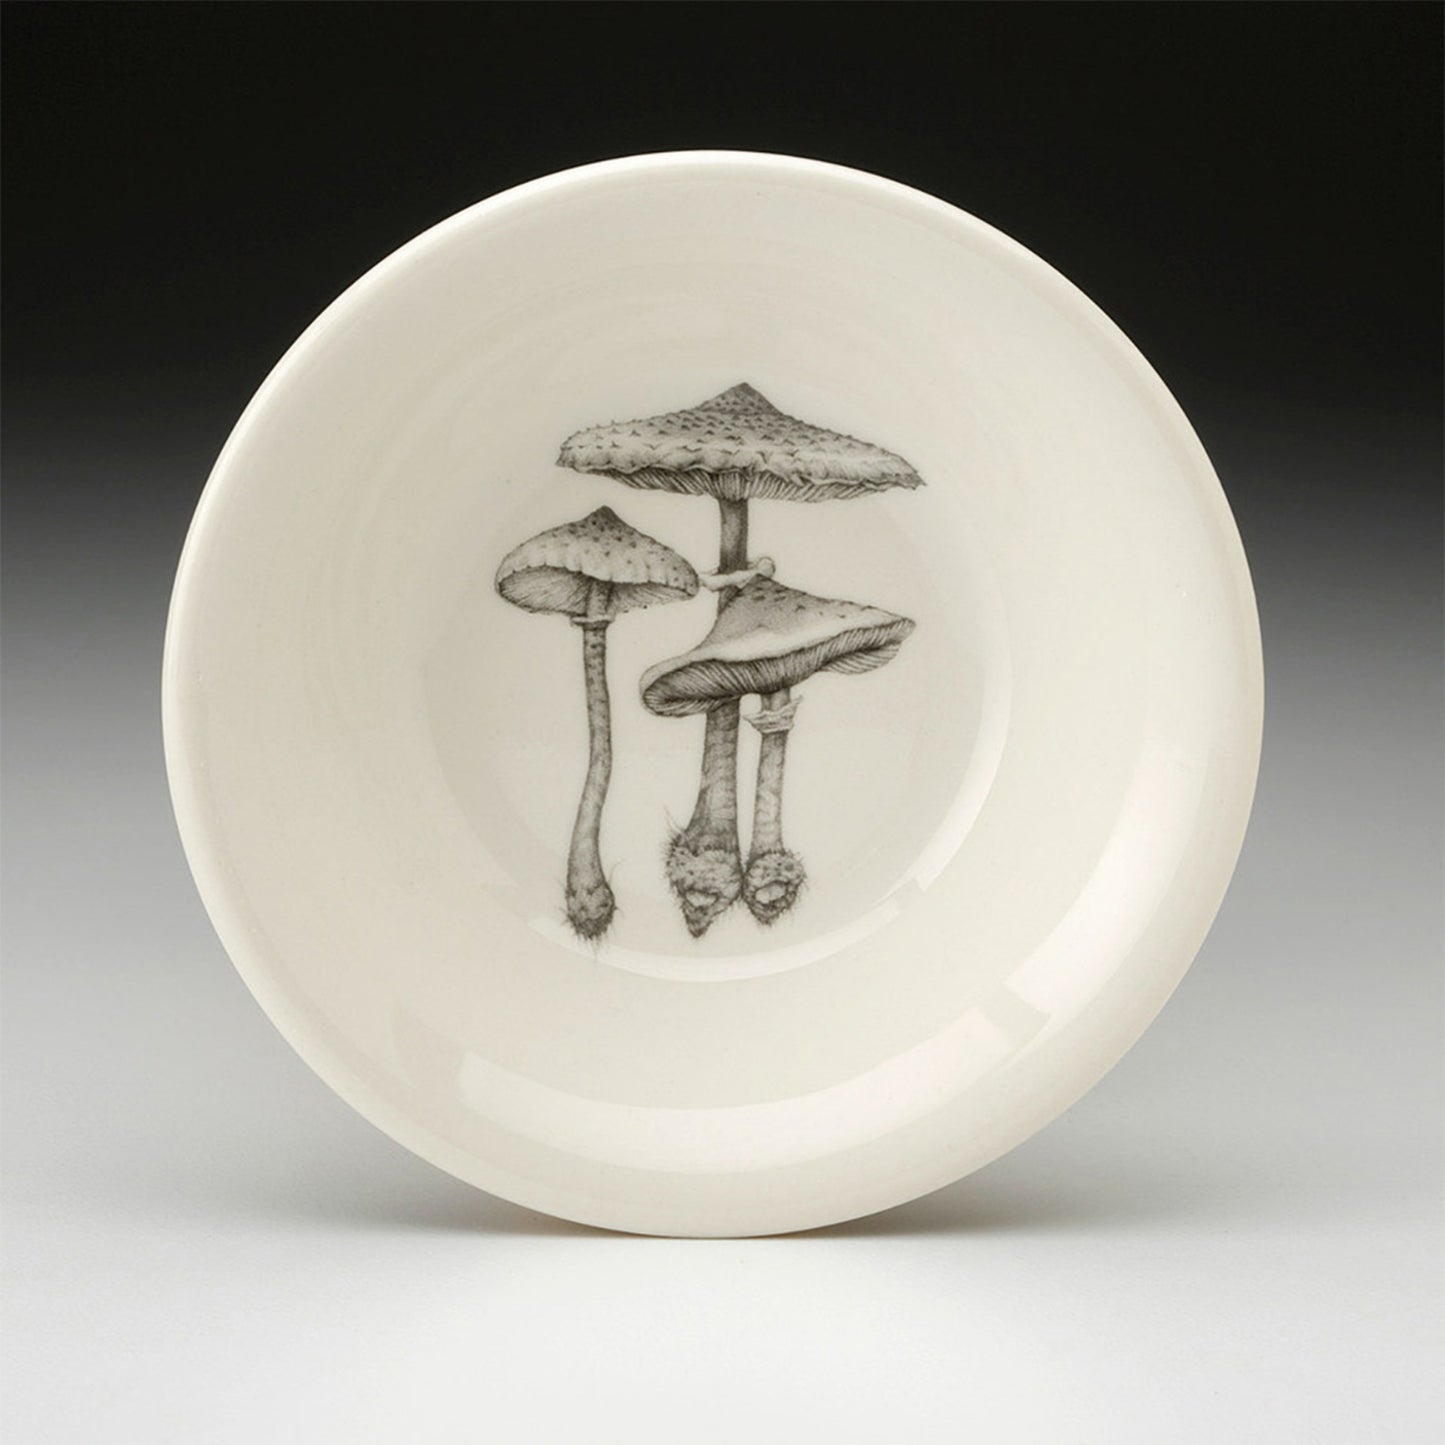 Laura Zindel Sauce Dish - More designs available